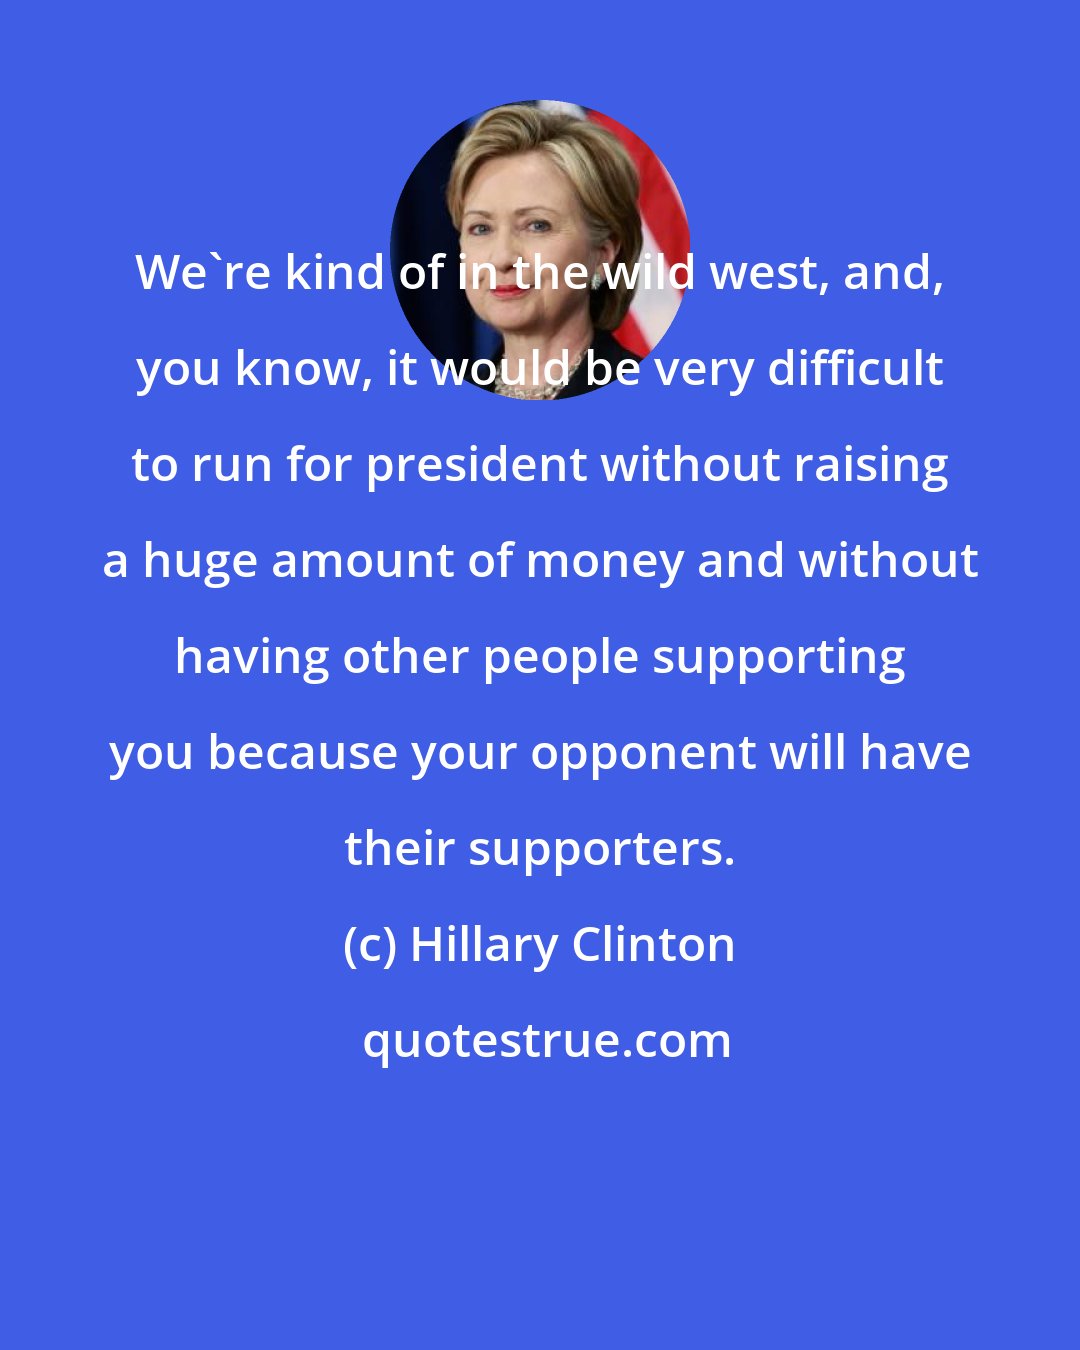 Hillary Clinton: We're kind of in the wild west, and, you know, it would be very difficult to run for president without raising a huge amount of money and without having other people supporting you because your opponent will have their supporters.